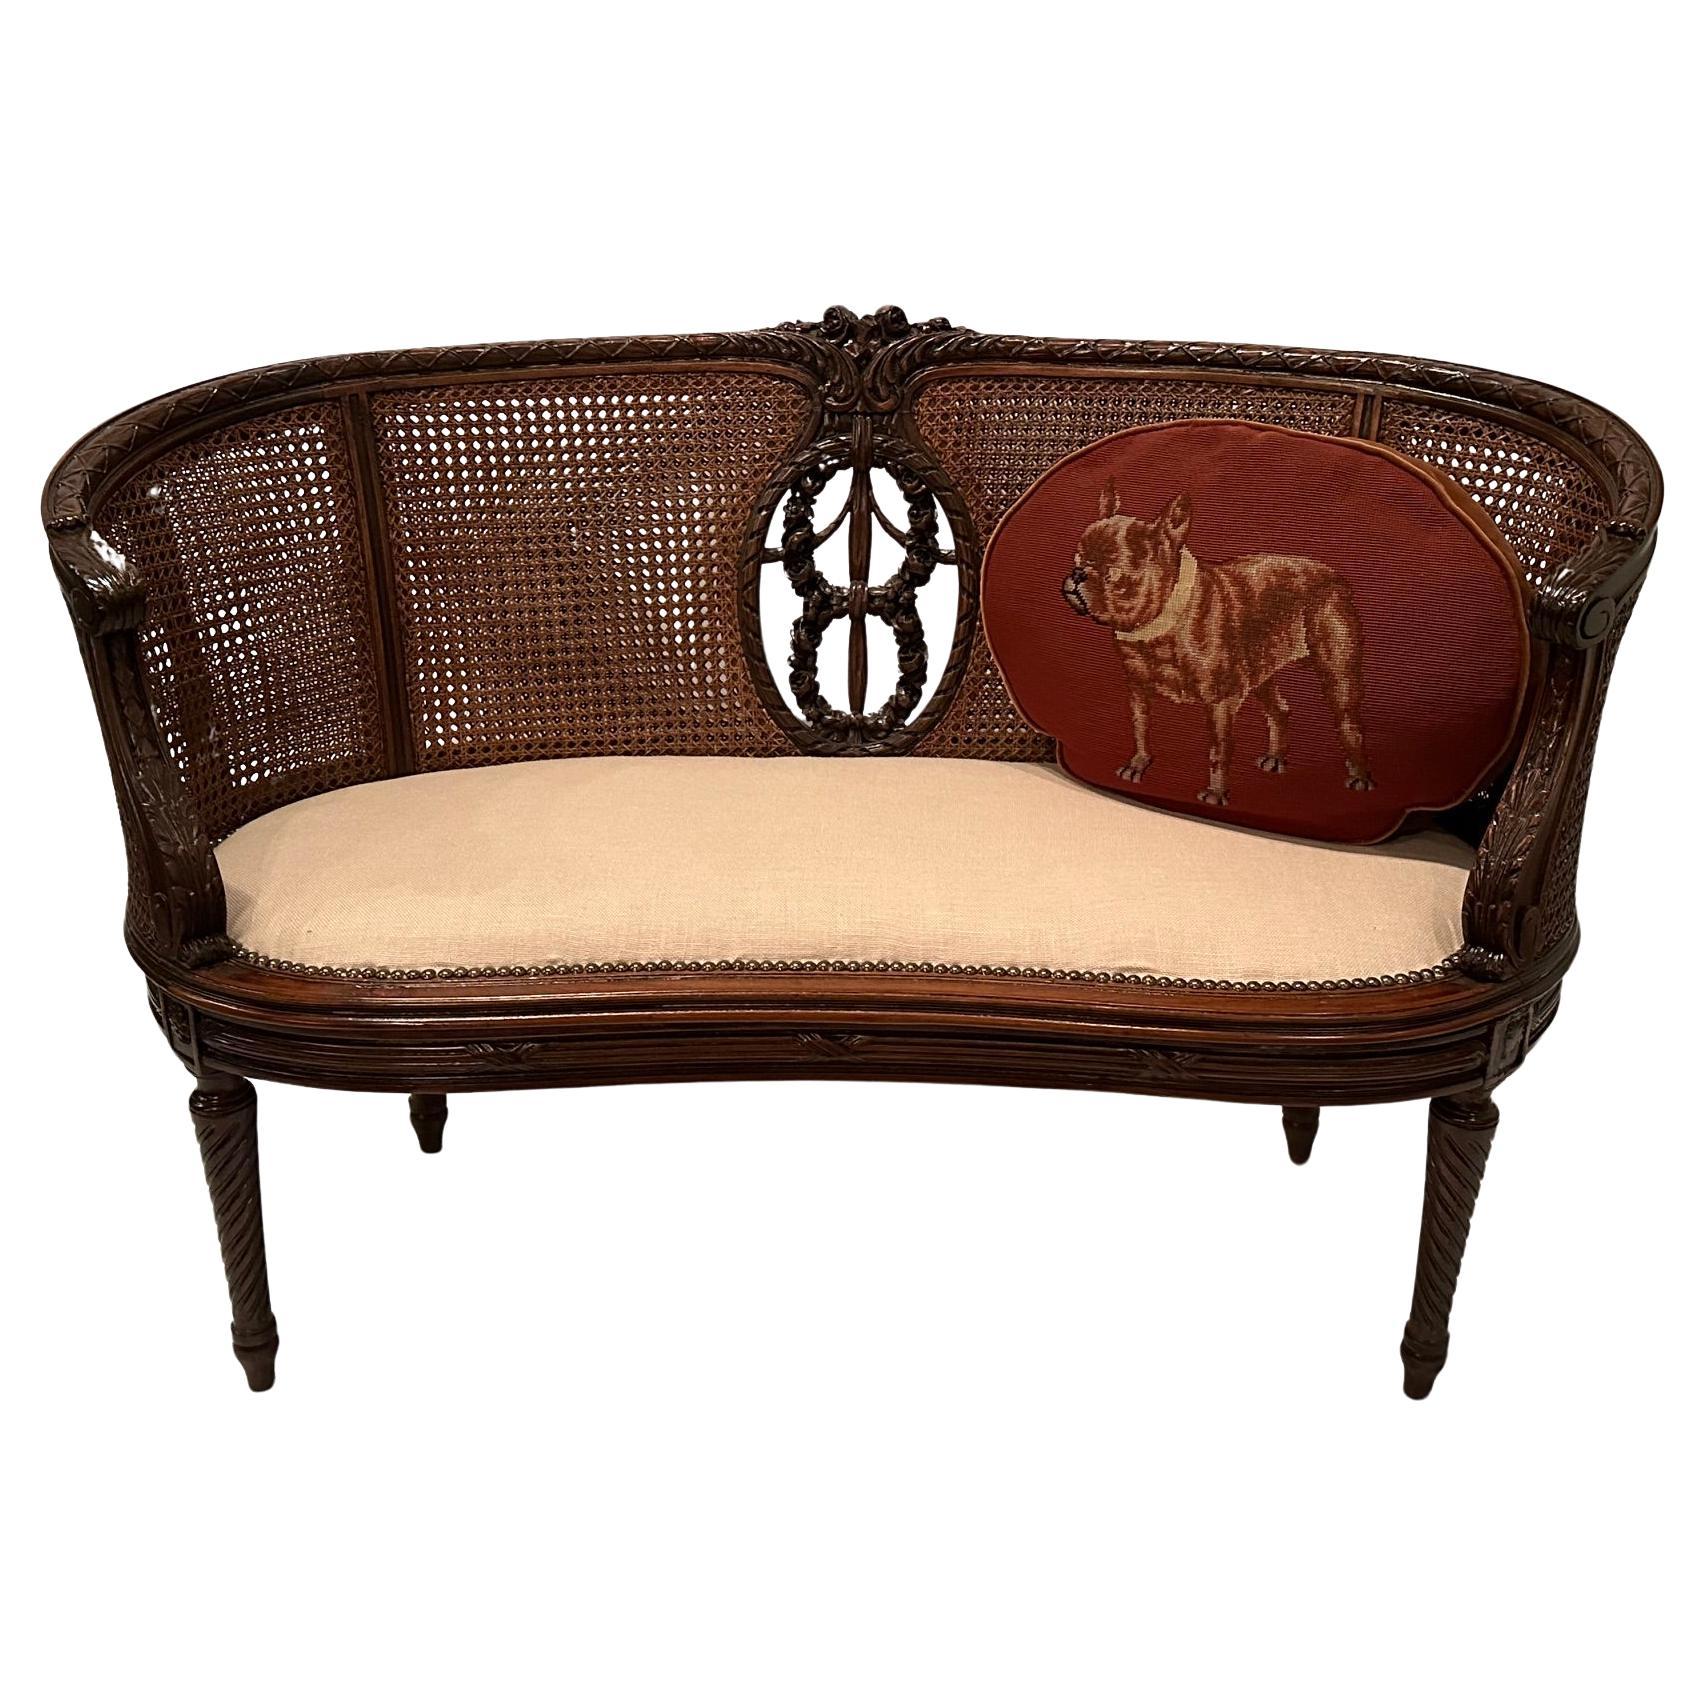 Beautiful hand carved mahogany loveseat having a central cartouche and original caning with upholstered off white seat.  The curved shape and detailed carvings make this a show stopper.  arm height 27